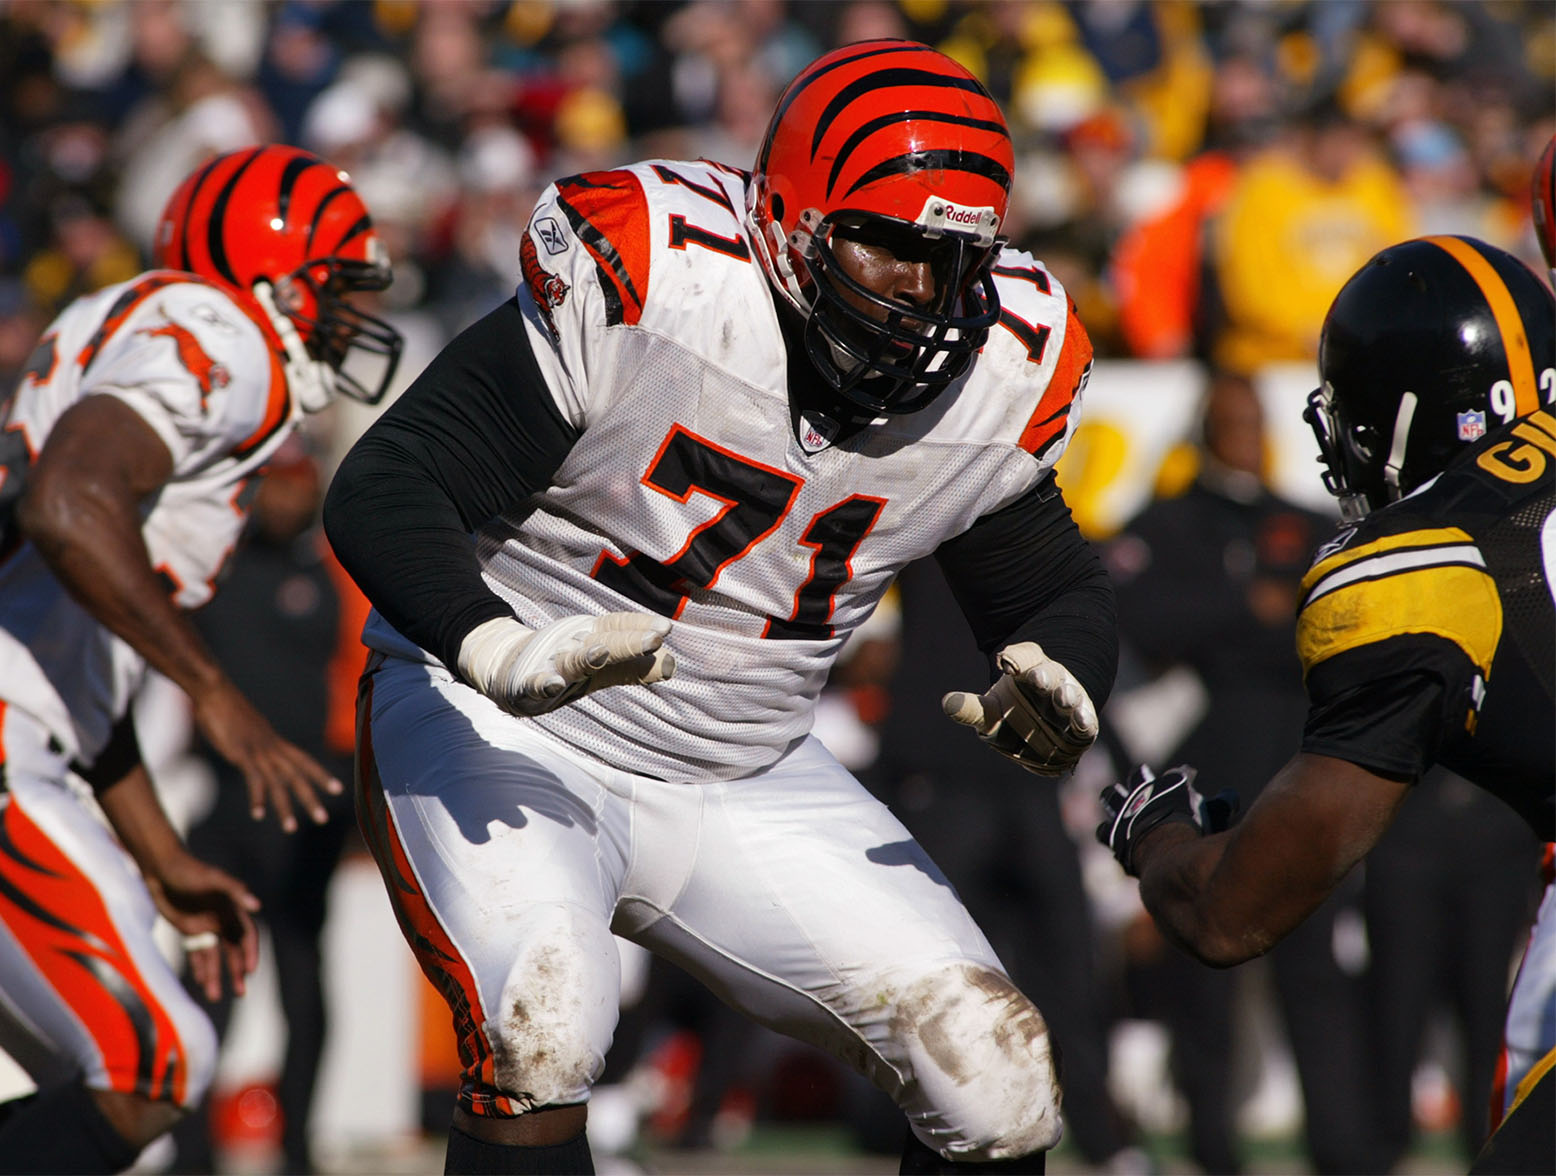 PITTSBURGH, PA - NOVEMBER 30: Willie Anderson #71 of the Cincinnati Bengals blocks the line during the game against the Pittsburgh Steelers on November 30, 2003 at Heinz Field in Pittsburgh, Pennsylvania. The Bengals defeated the Steelers 24-20. (Photo by Rick Stewart/Getty Images)